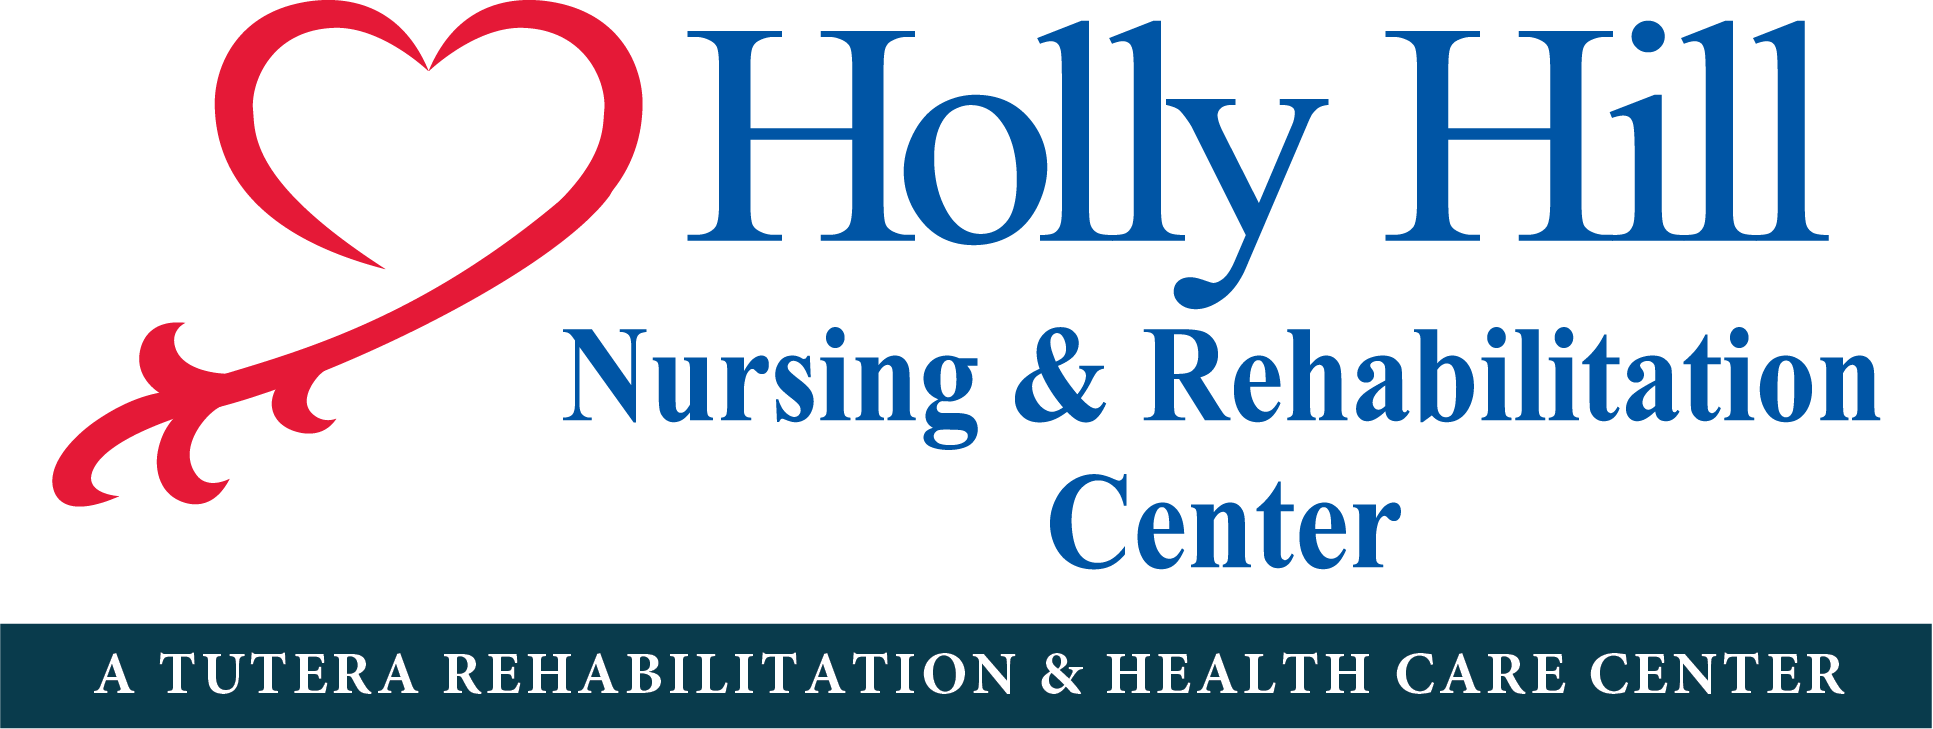 Logo for Holly Hill Nursing & Rehabilitation Center. The design includes a stylized red heart with an extended flourish on the left, beside blue text that says 